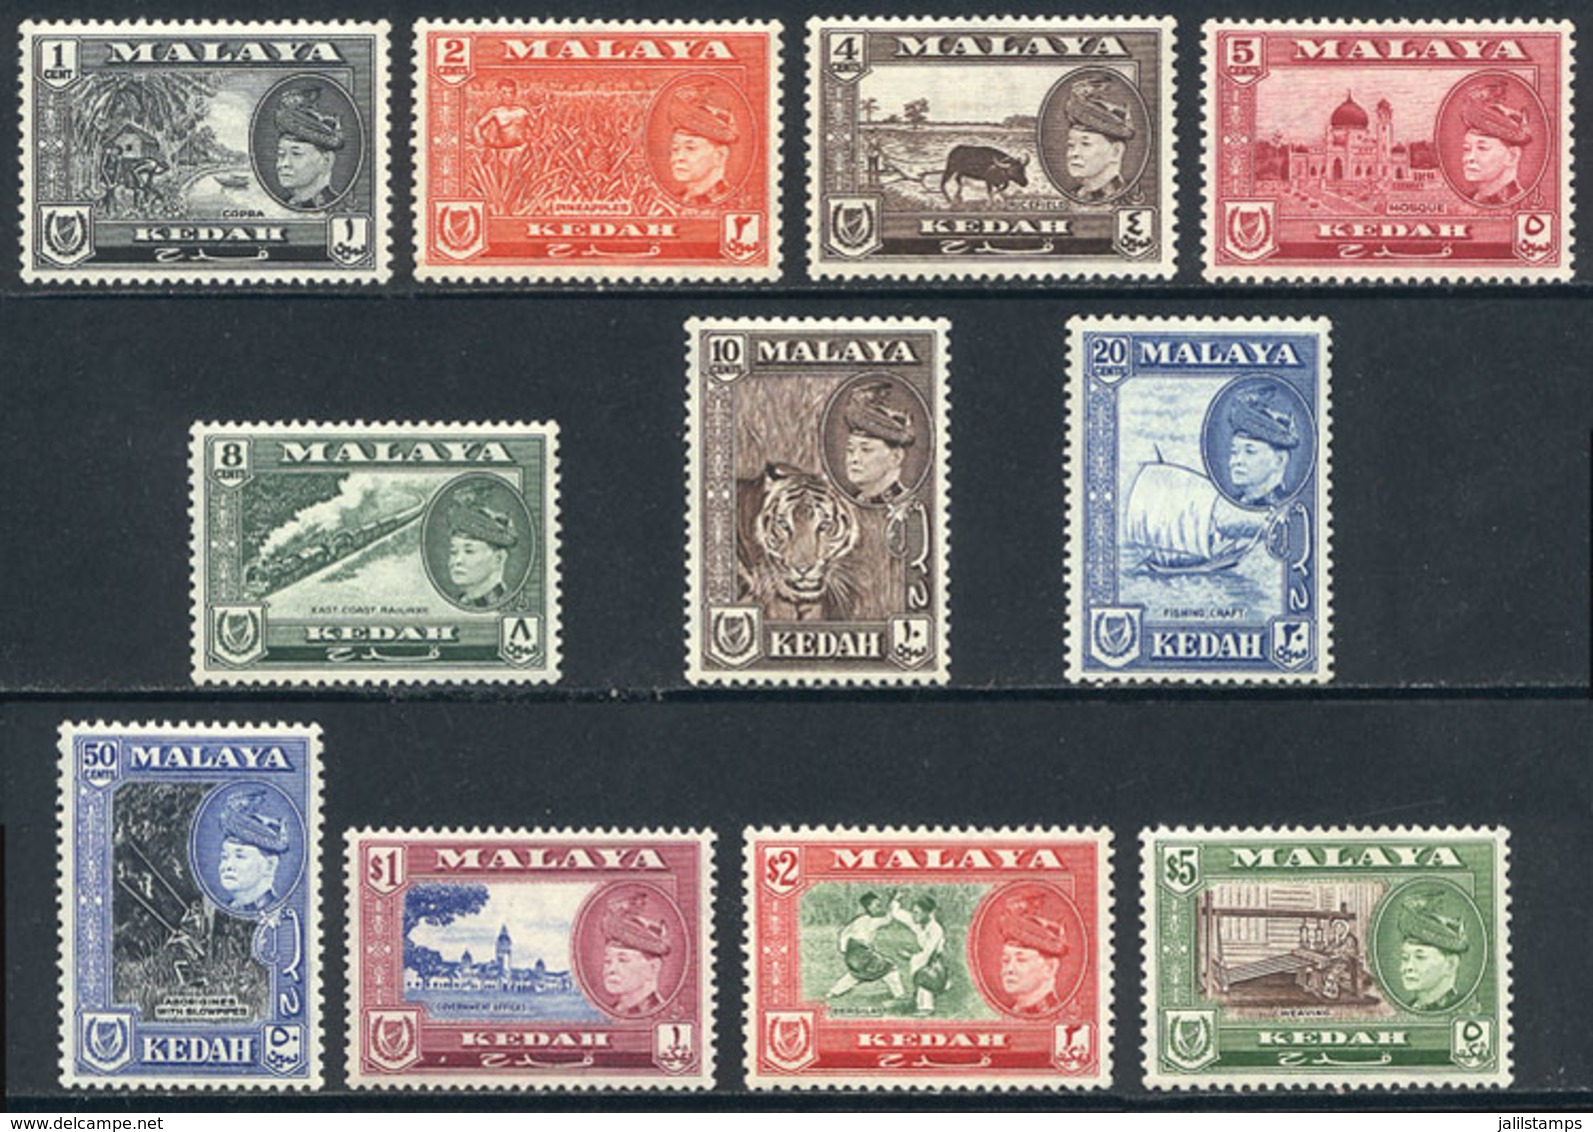 MALAYA: Sc.83/93, 1957 Animals, Ships, Trains, Sports And Other Topics, Complete Set Of 11 Unmounted Values, Excellent Q - Kedah